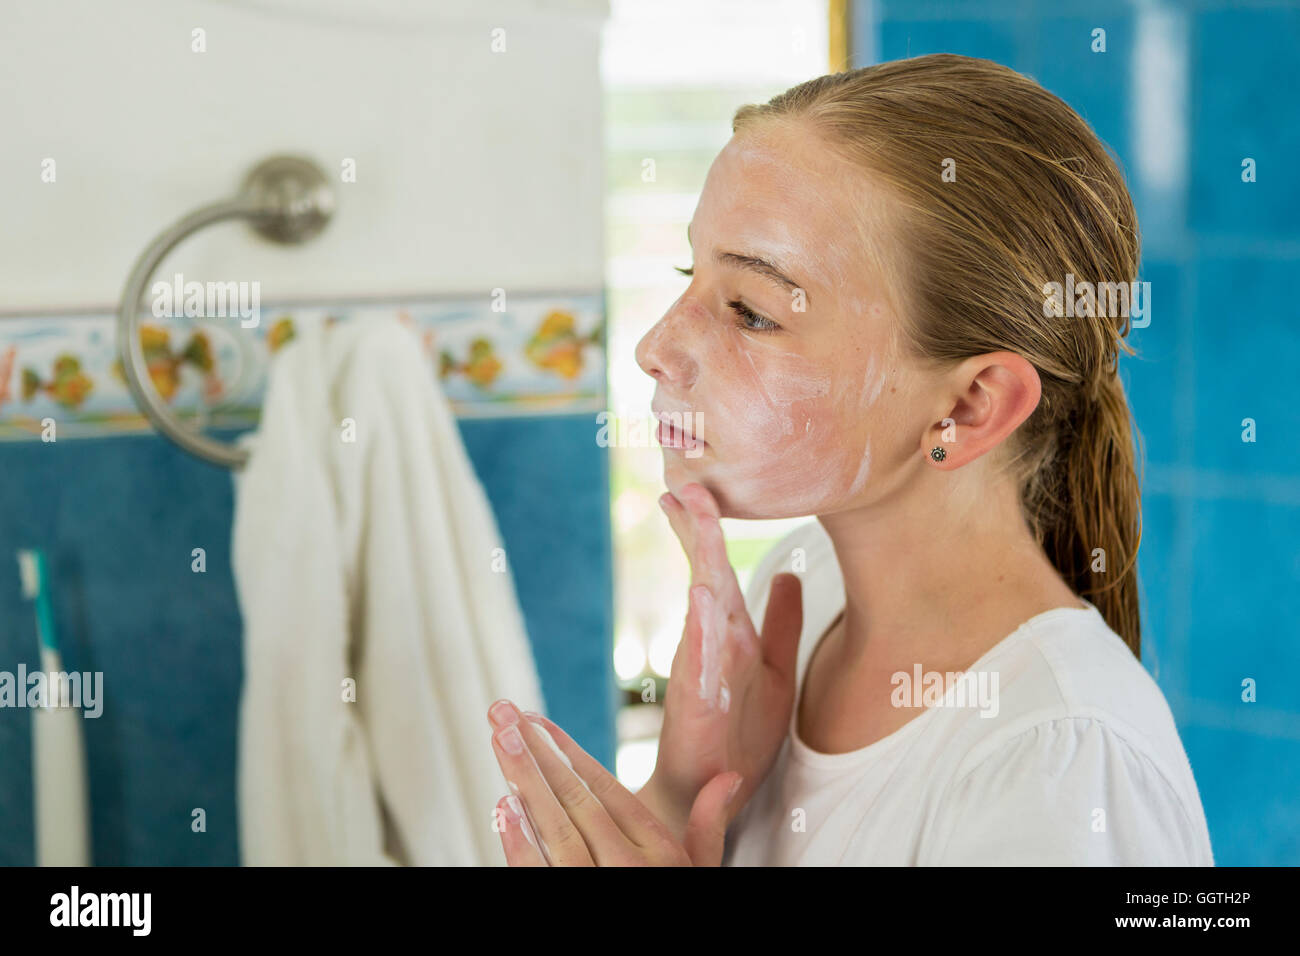 Caucasian girl washing face with soap Stock Photo